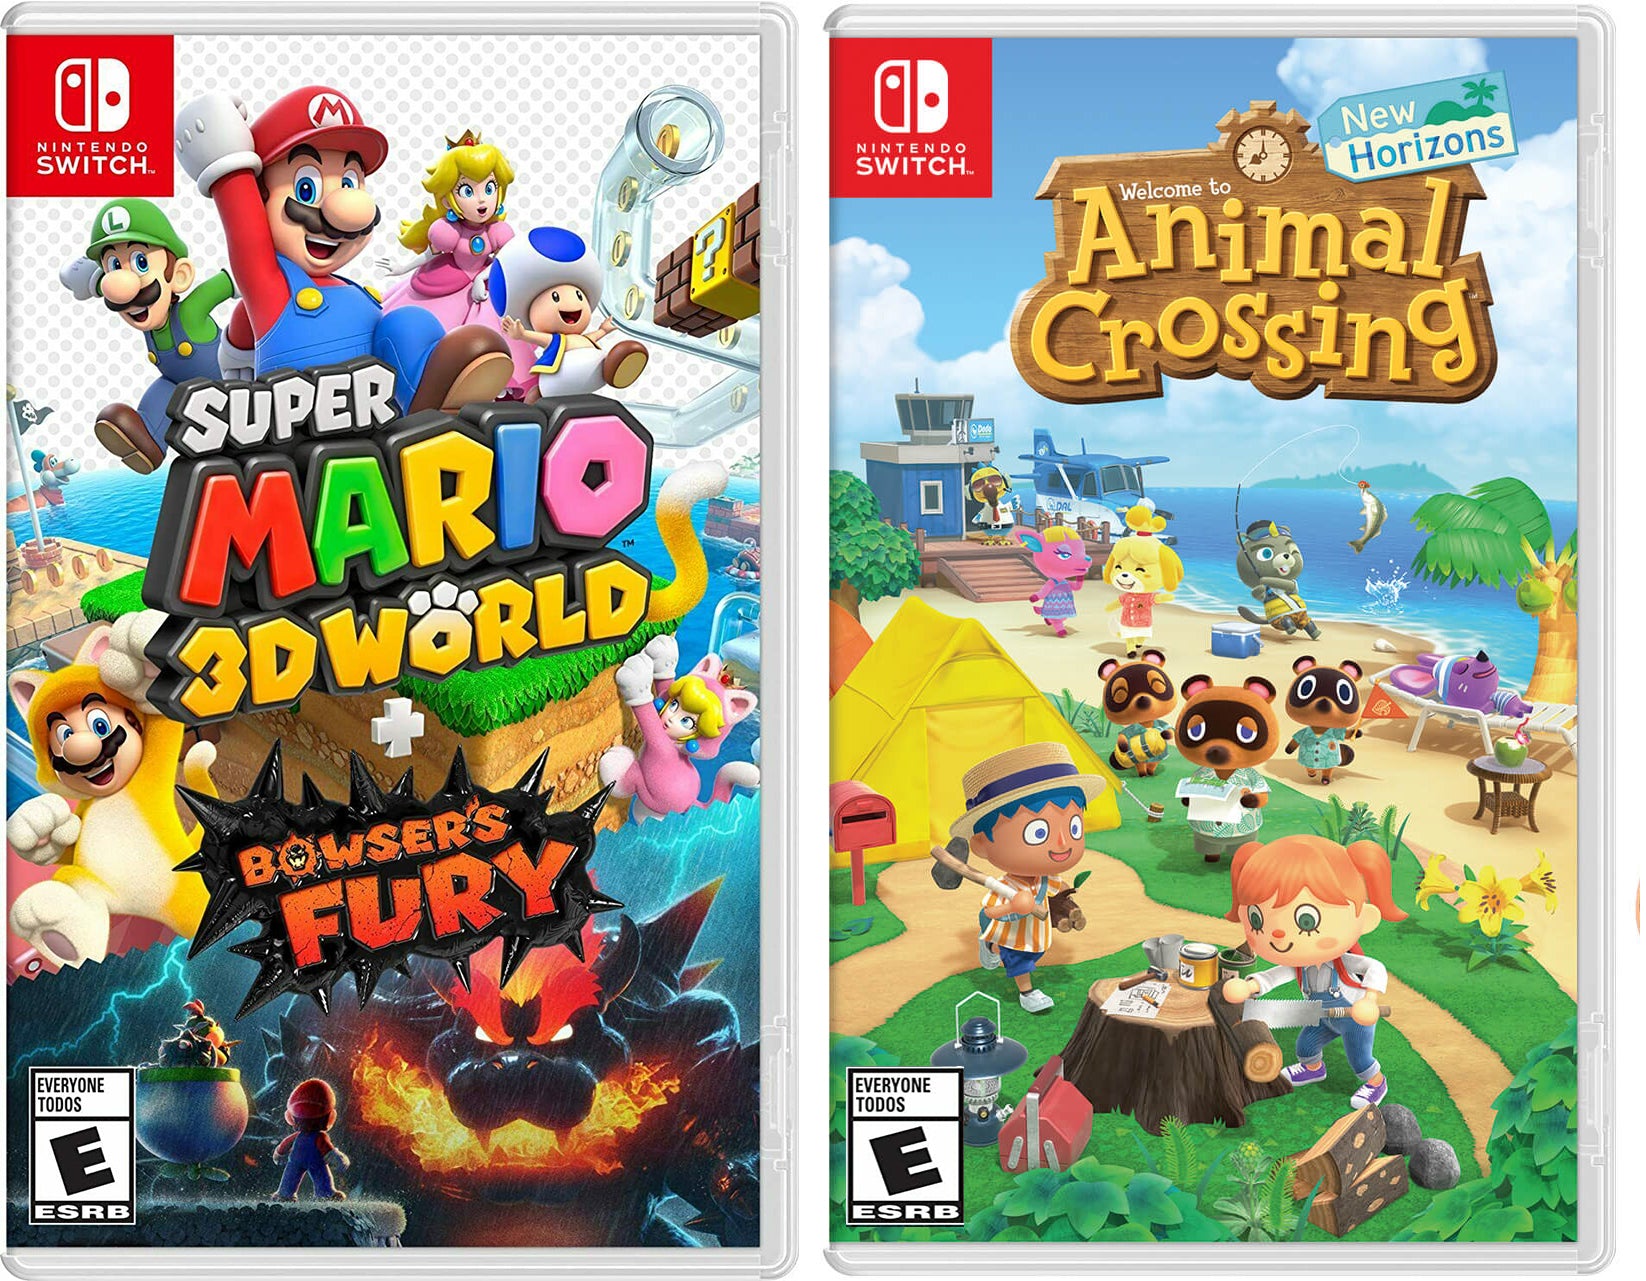 Super Mario 3D World + Bowser’s Fury - Nintendo Switch and Animal Crossing New Horizons Bundle - Pro-Distributing